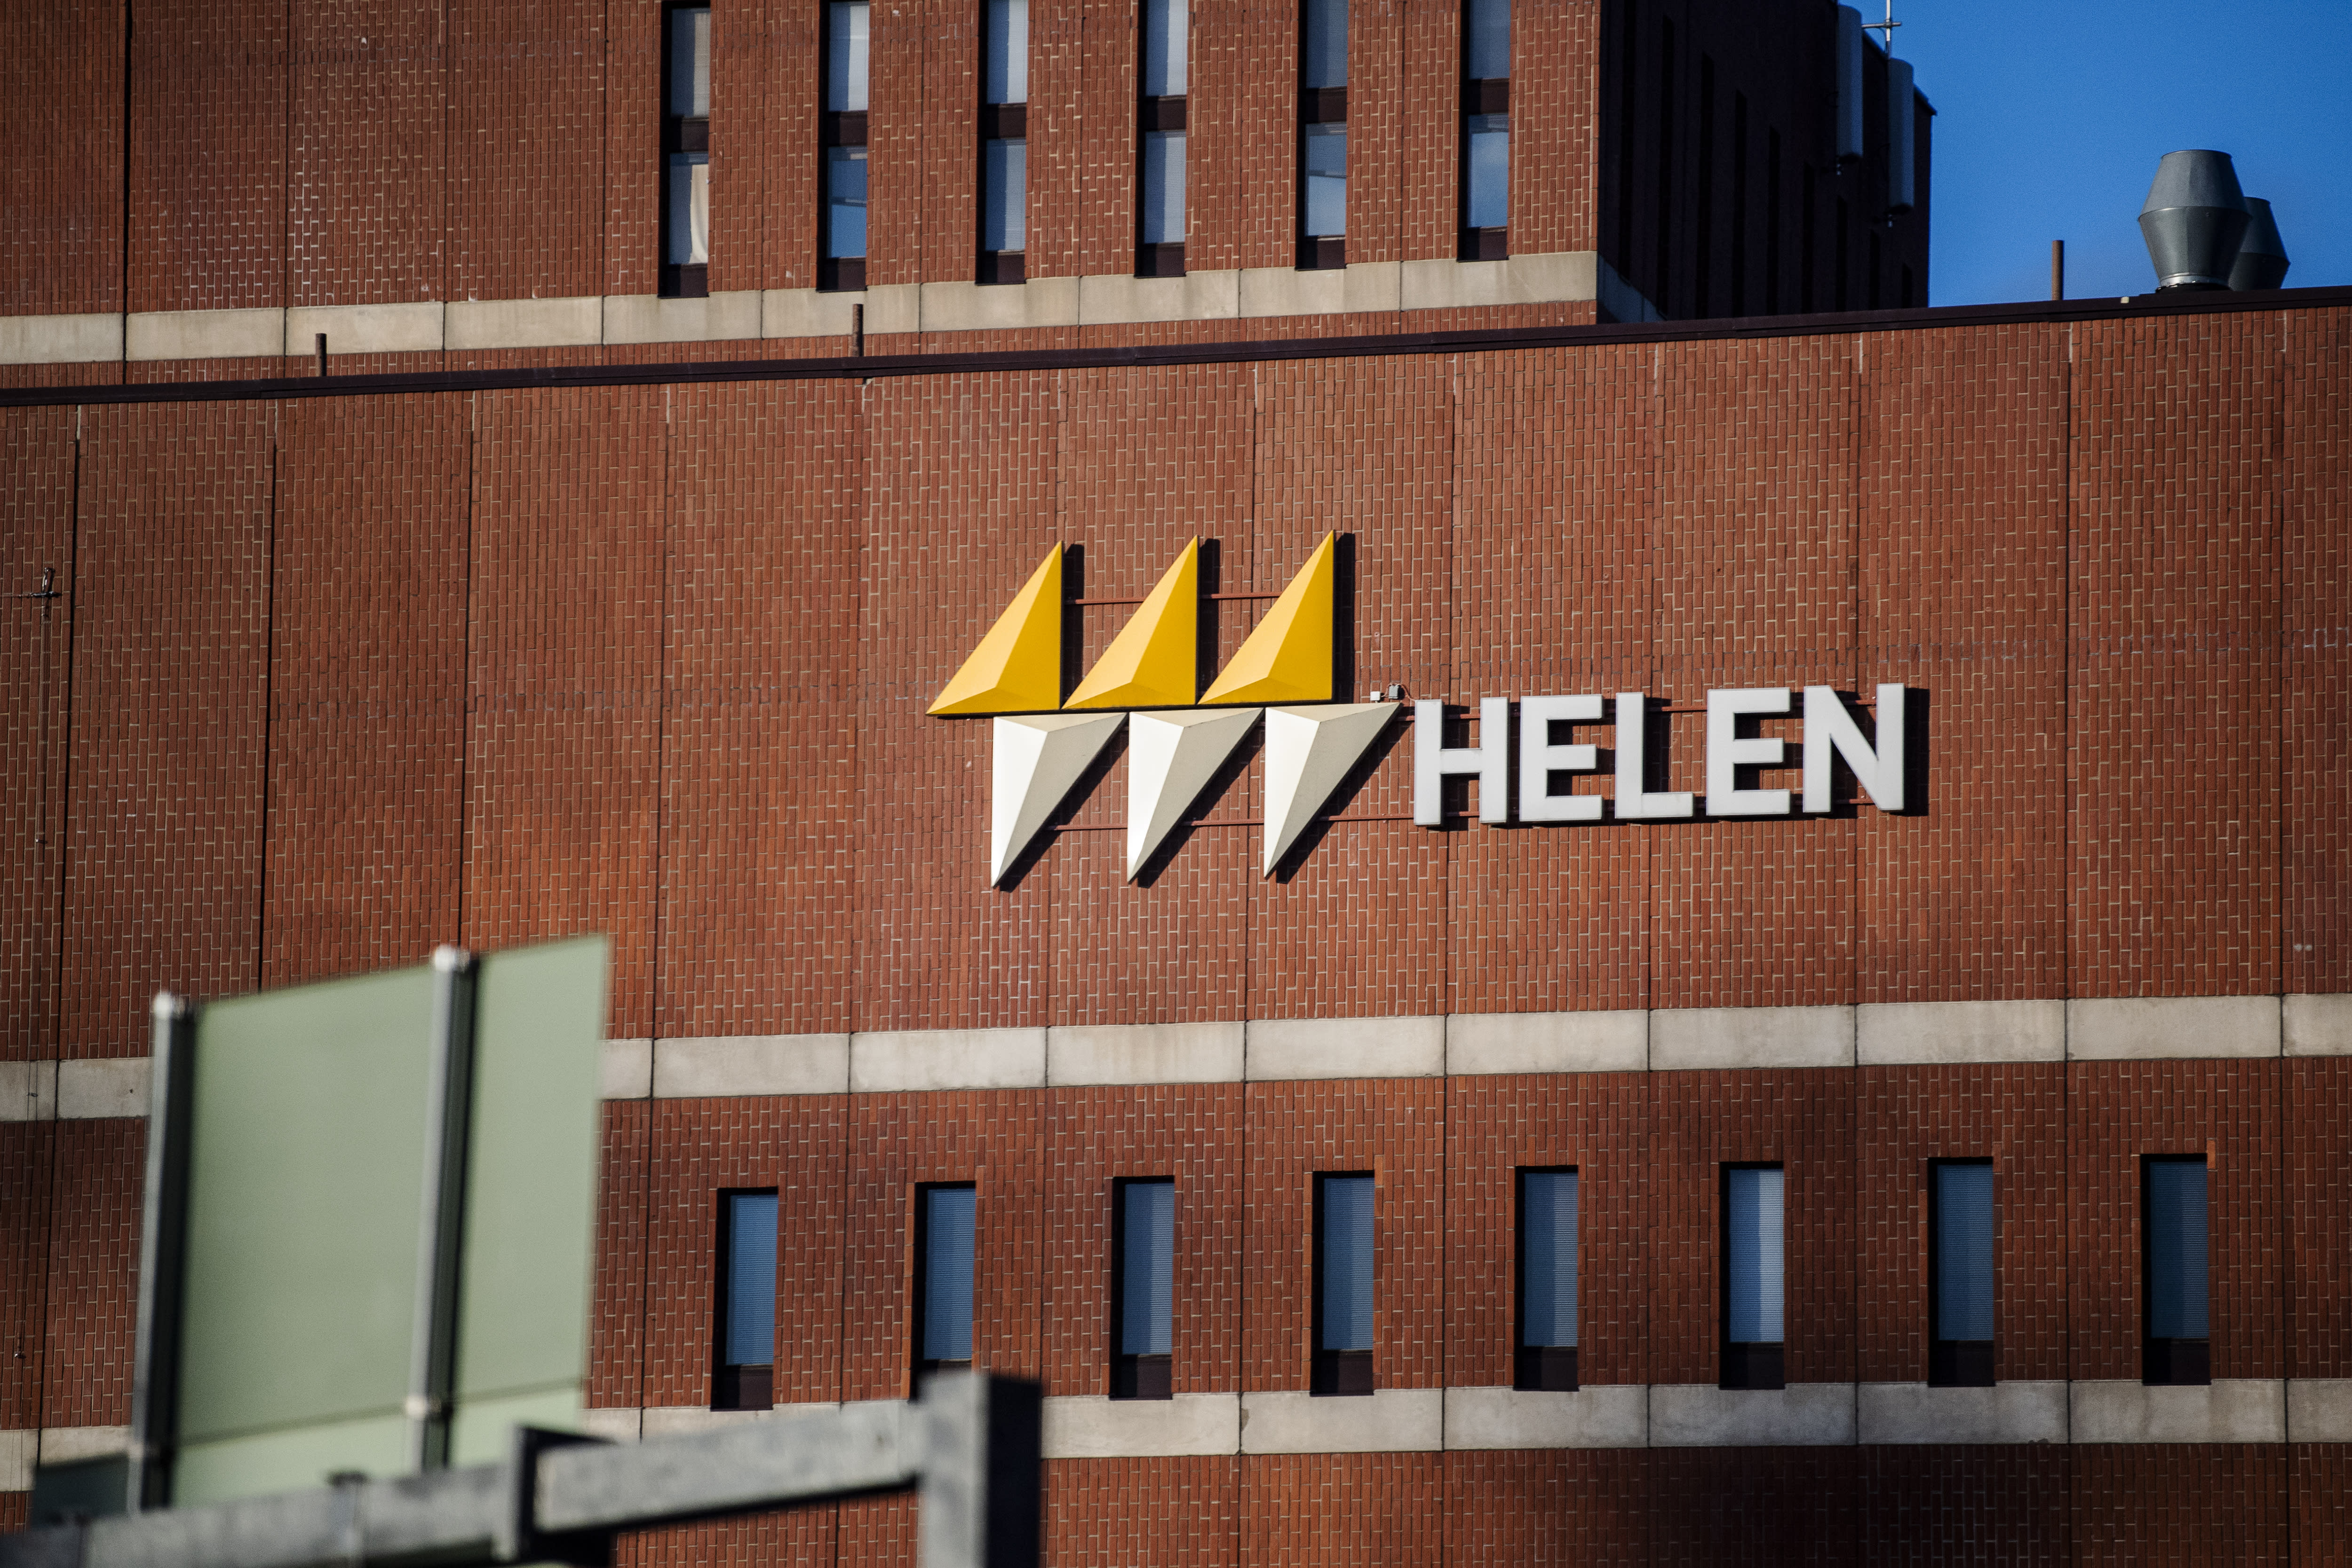 The Helsinki energy company lowers prices